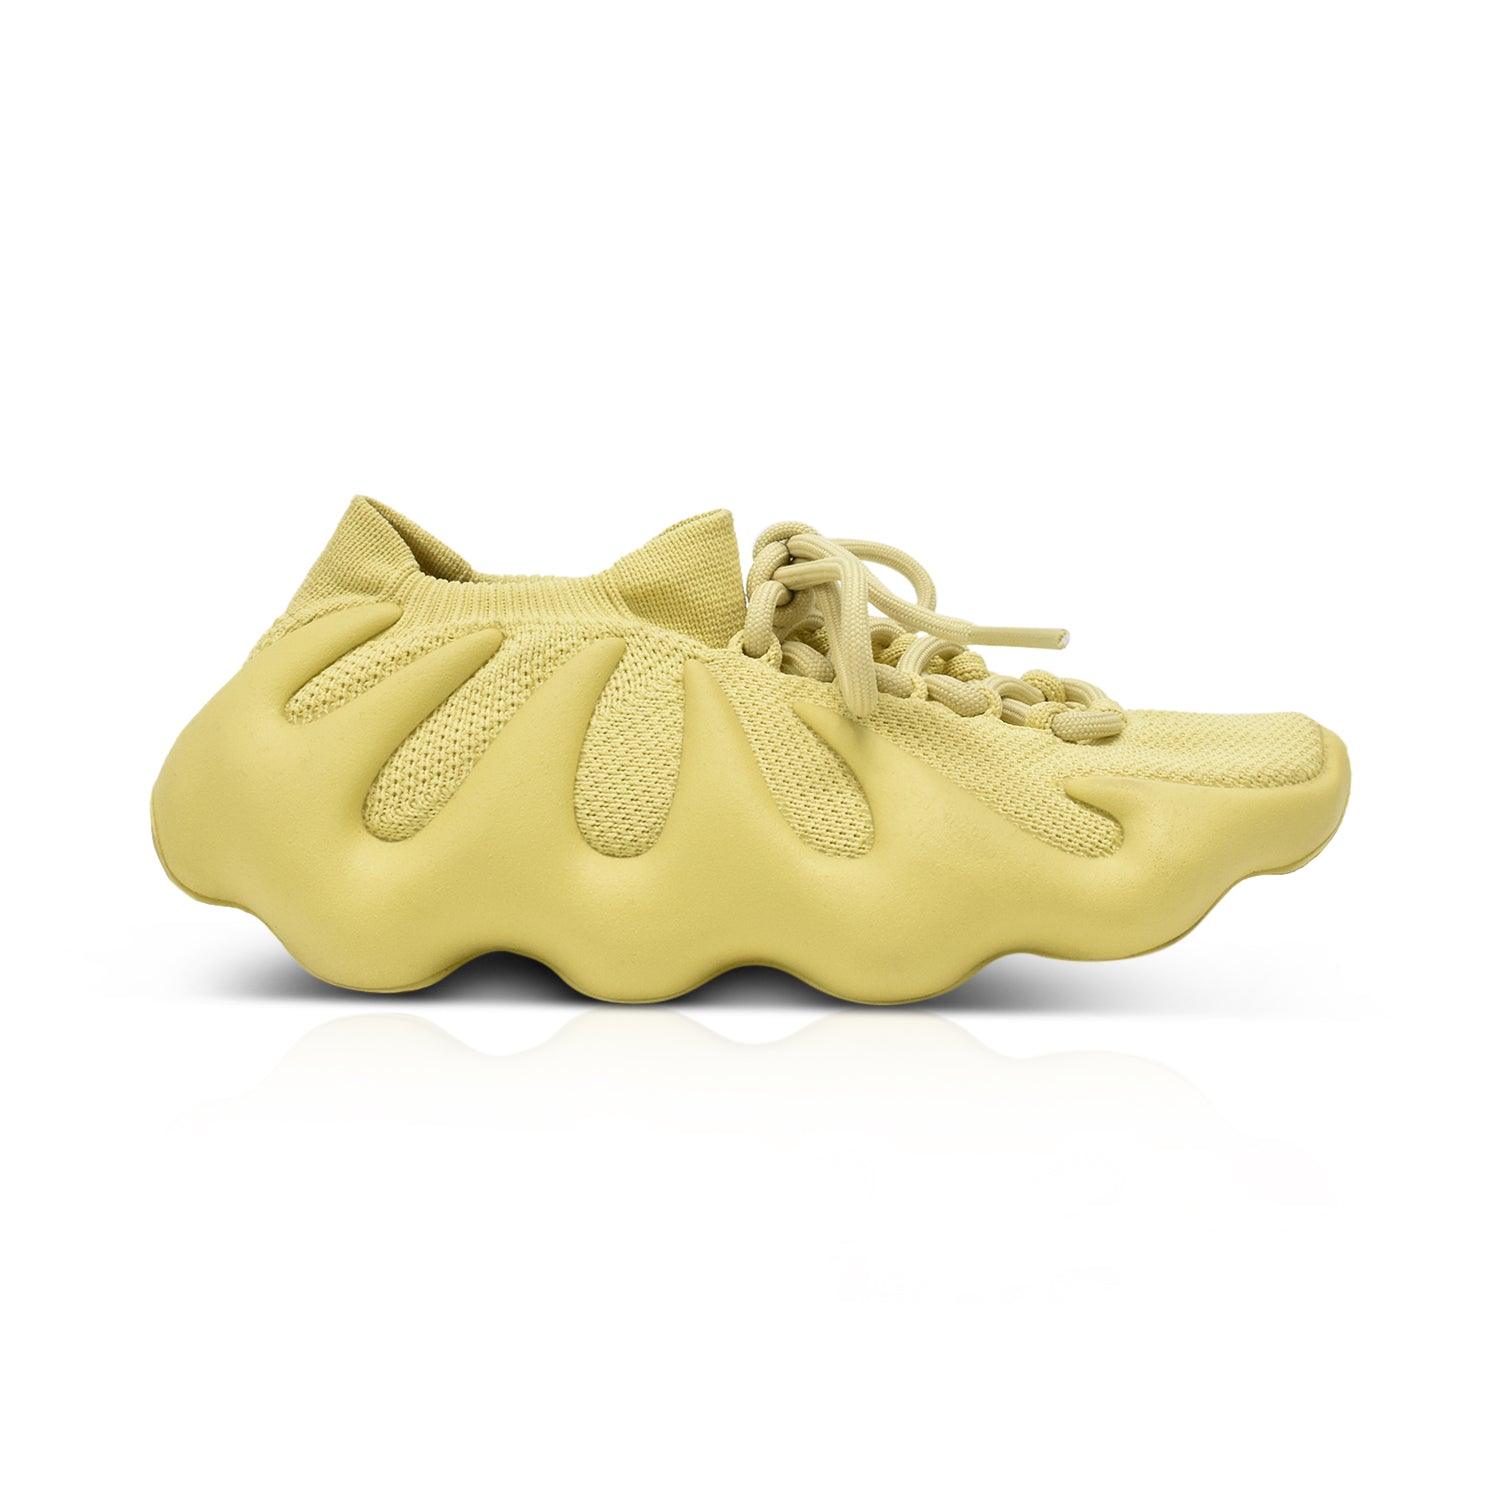 Yeezy 'Sulfur 450' Sneakers - Men's 4.5 - Fashionably Yours